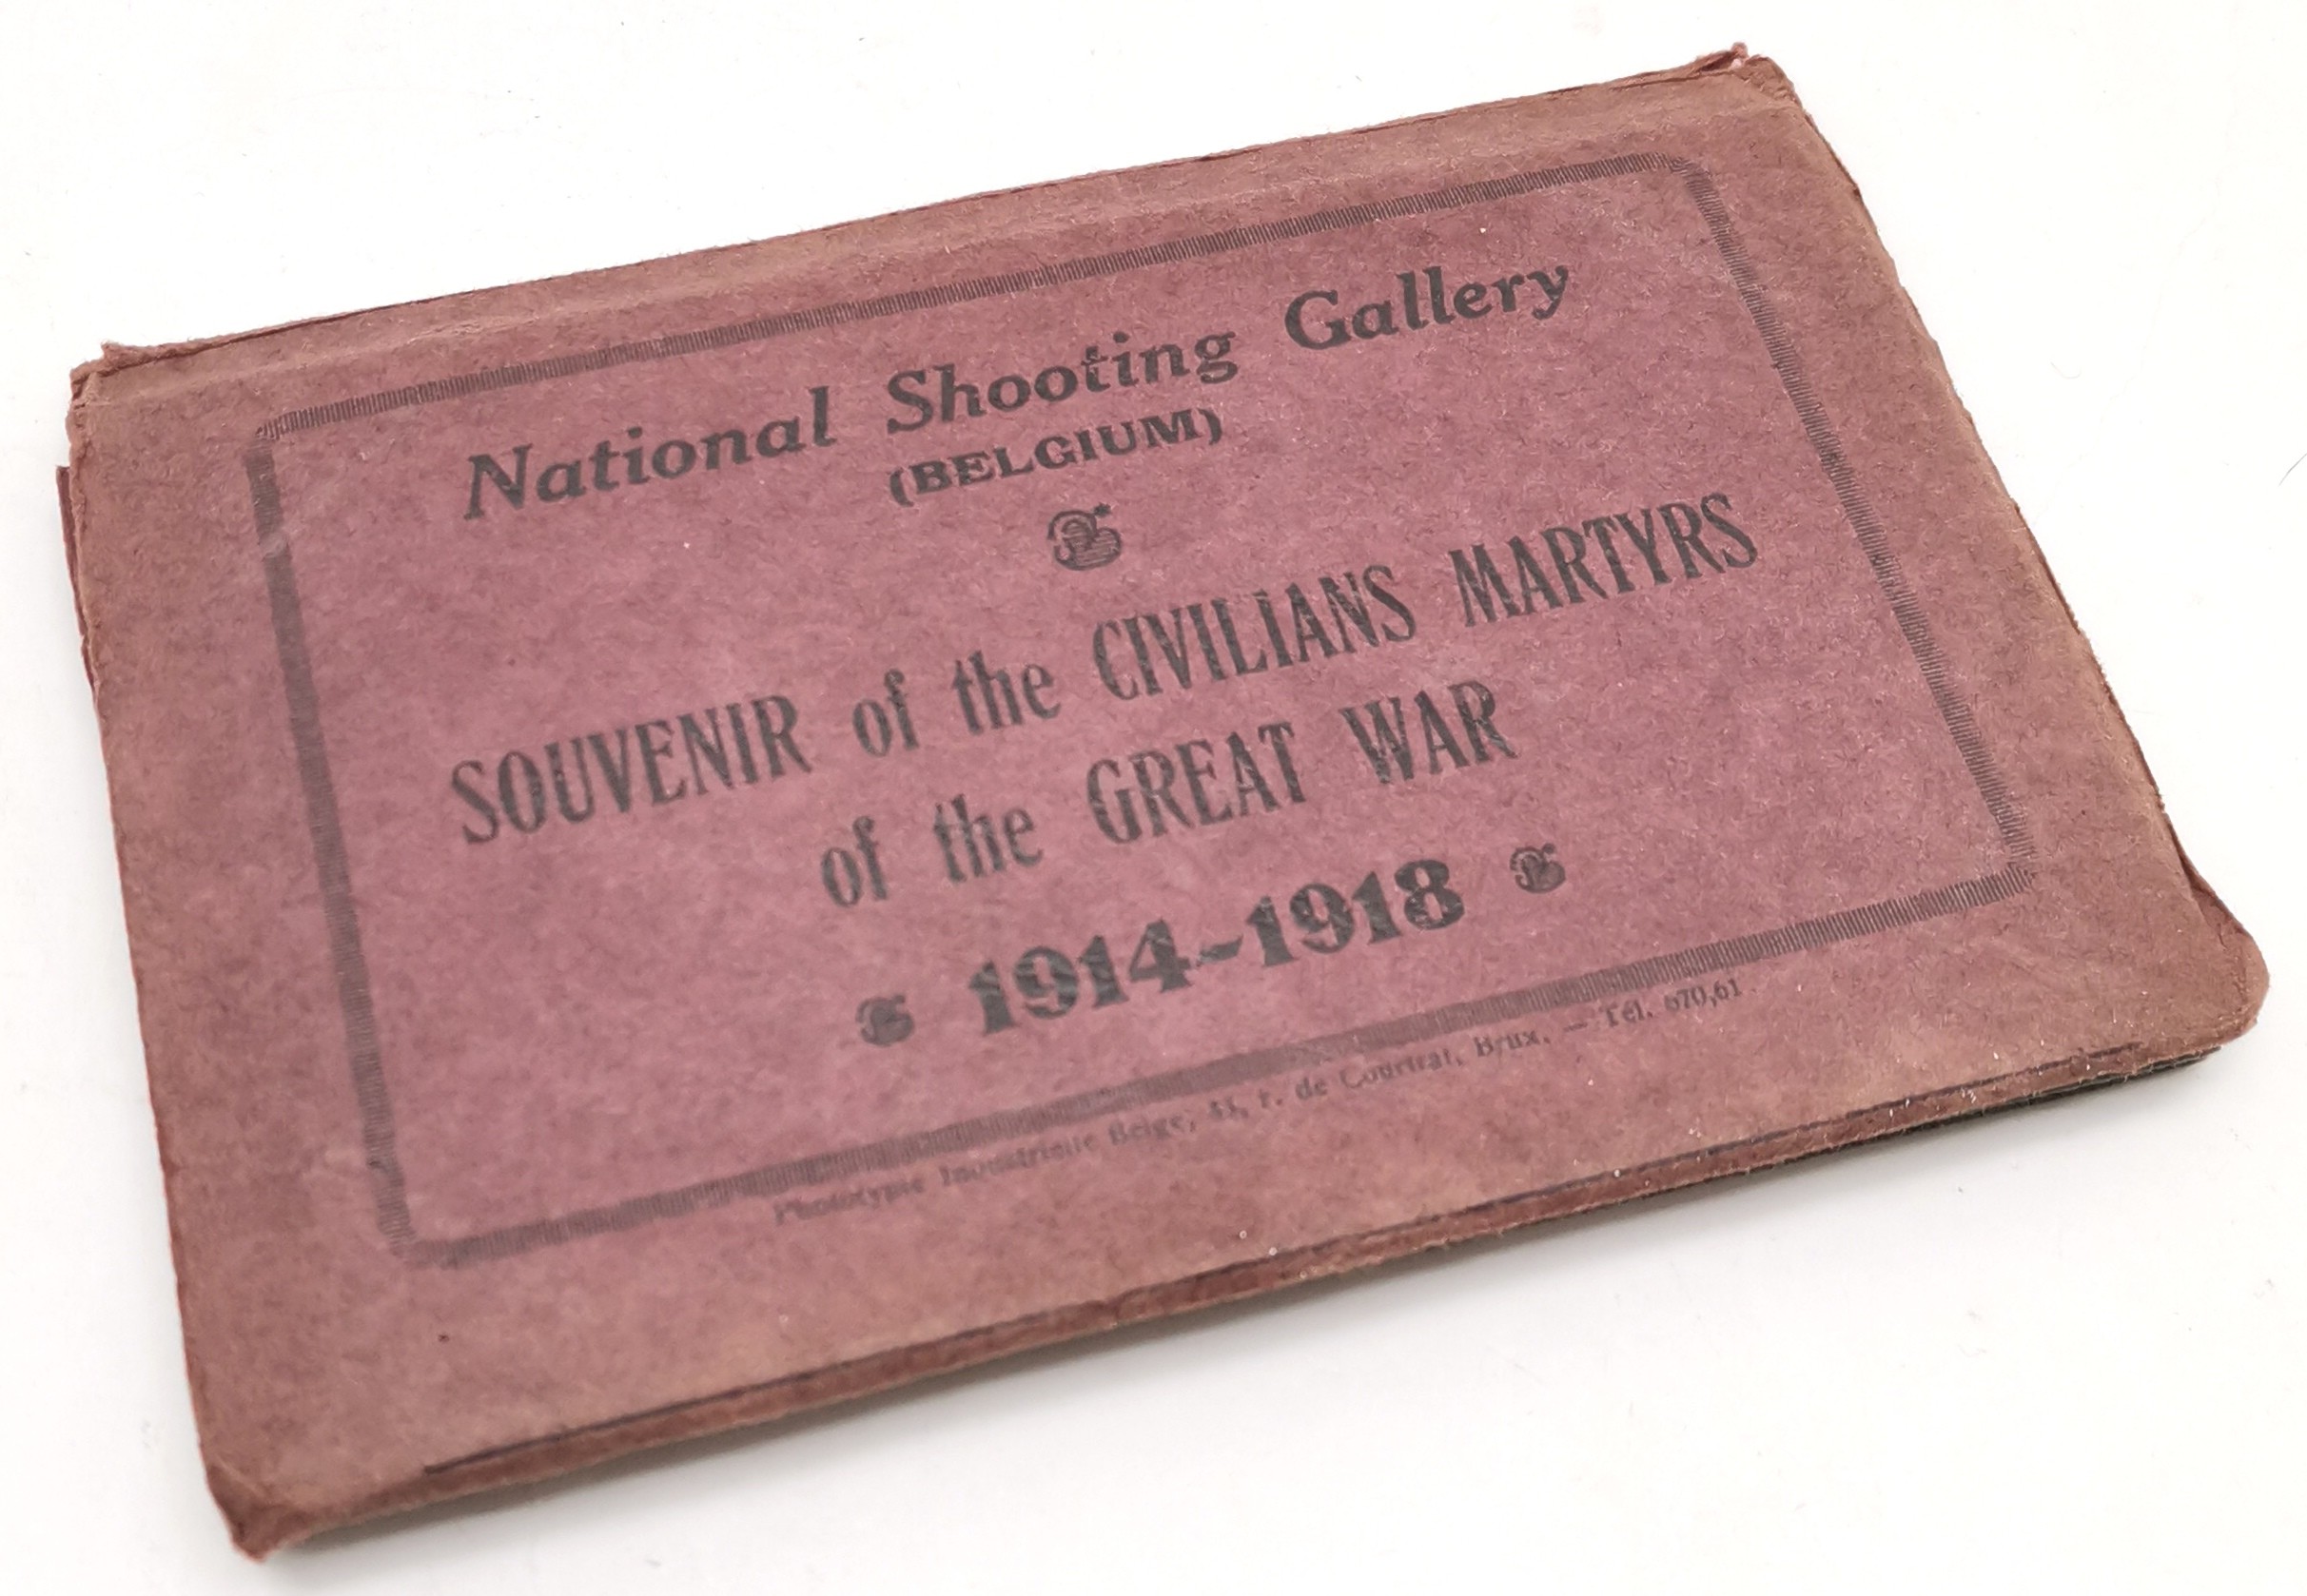 National Shooting Gallery WWI postcard souvenir folder of the civilians martyrs of the Great War - Image 3 of 5